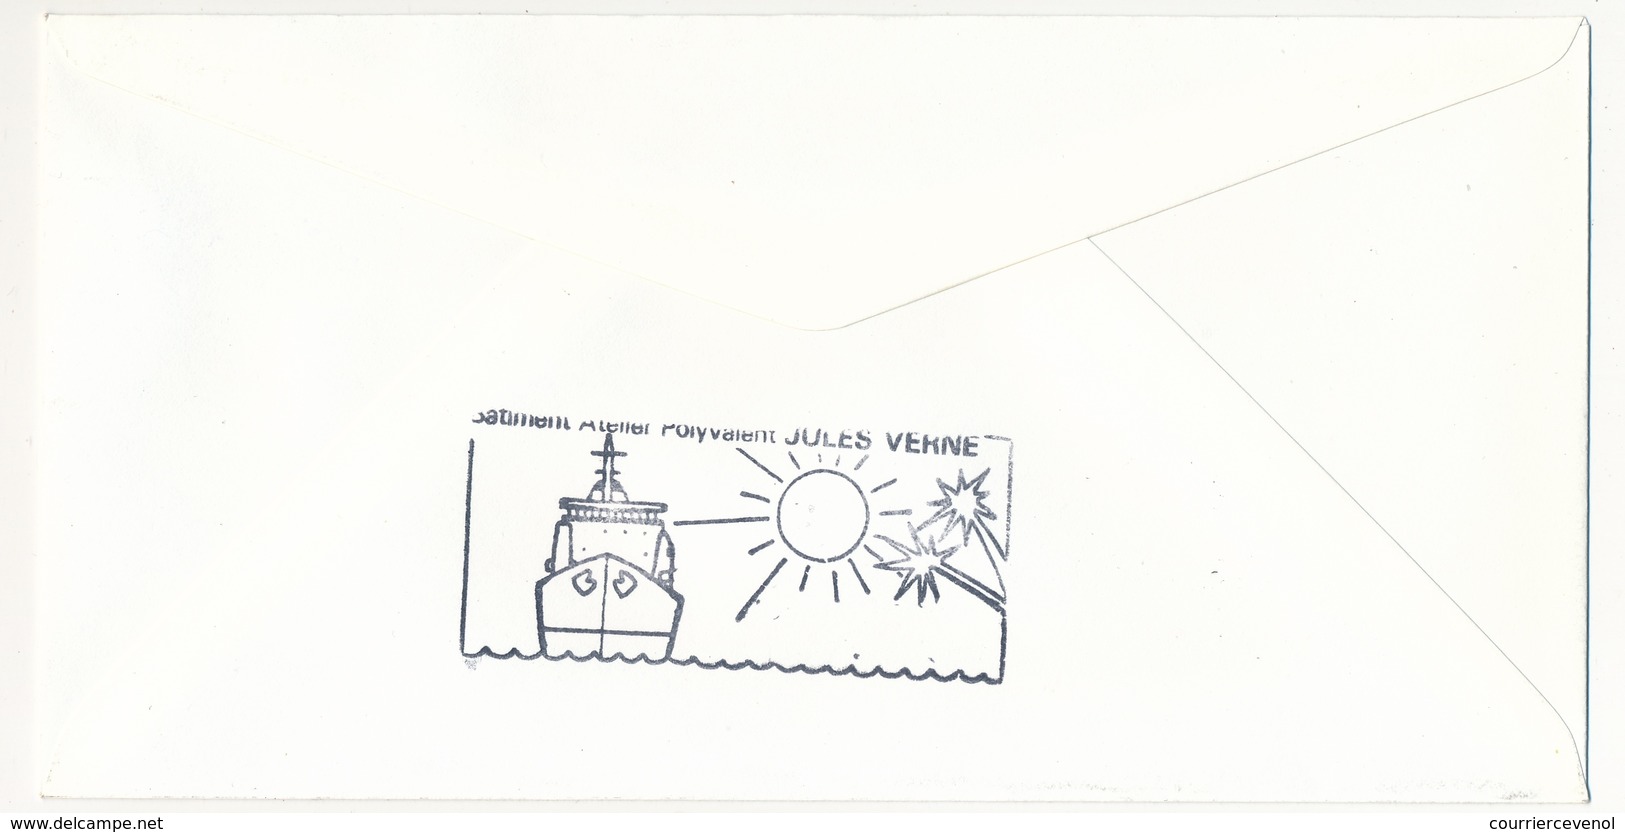 TAAF - Enveloppe FDC - 4,90 "Le Jules Verne" - Alfred Faure Crozet - 1-1-1988 - FDC